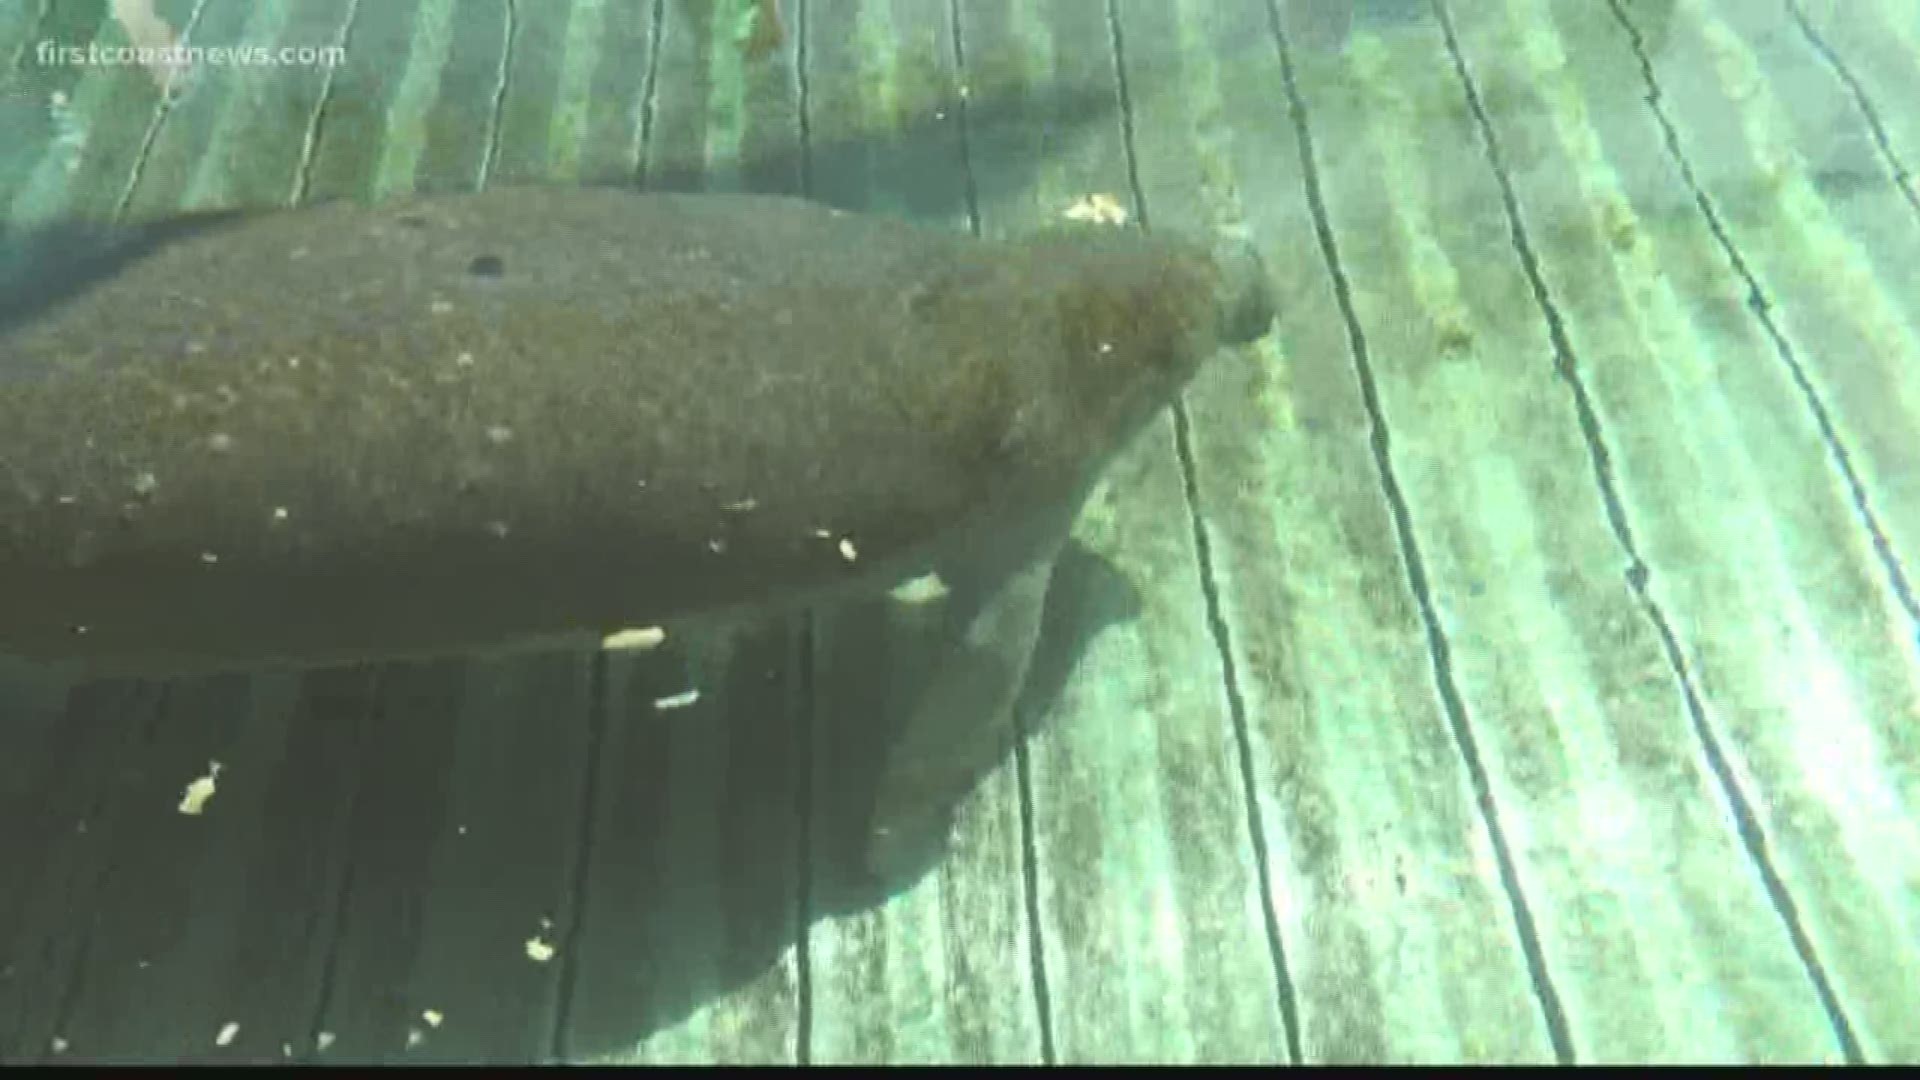 A manatee rescued from the beaches at Naval Station Mayport is recovering nicely at the Jacksonville Zoo and Gardens.